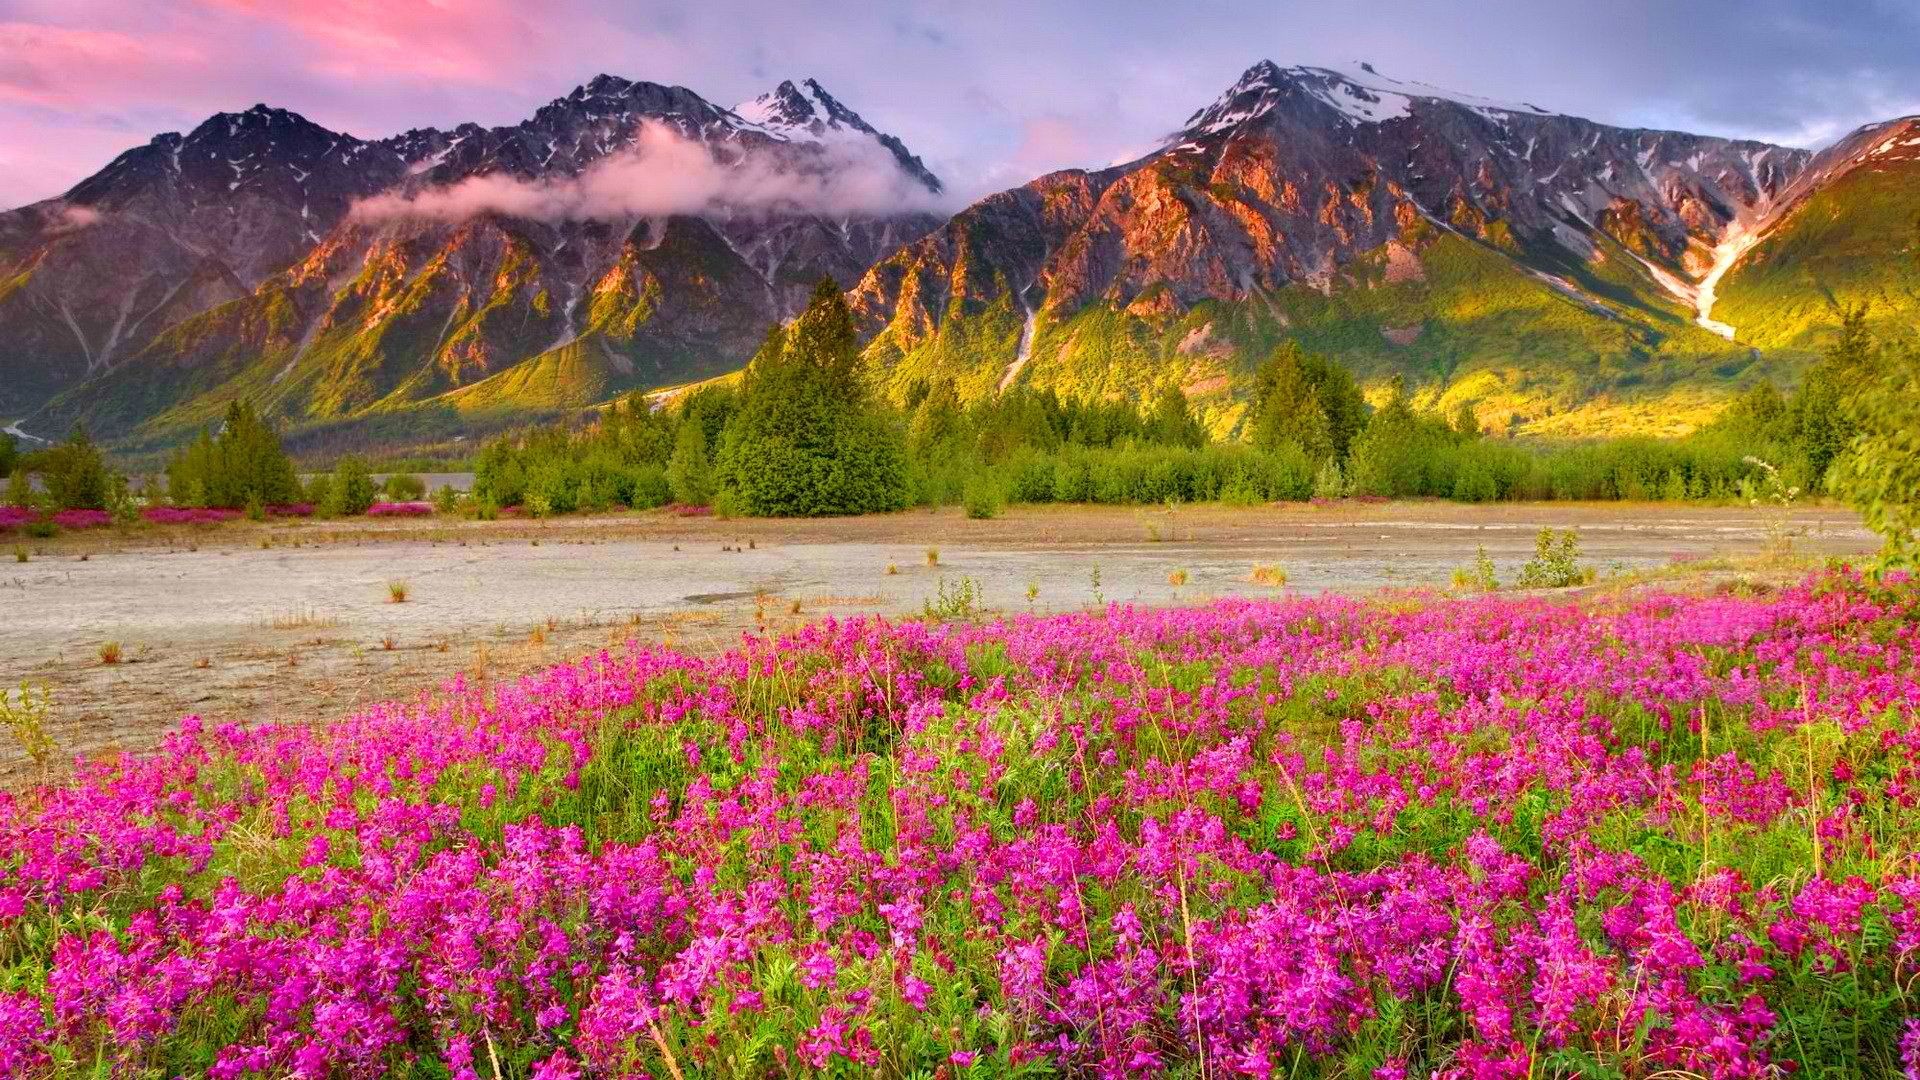 1920x1080 Wild Flowers Mountain Filed Hd Wallpapers New Desktop Widescreen Images  Field Nature